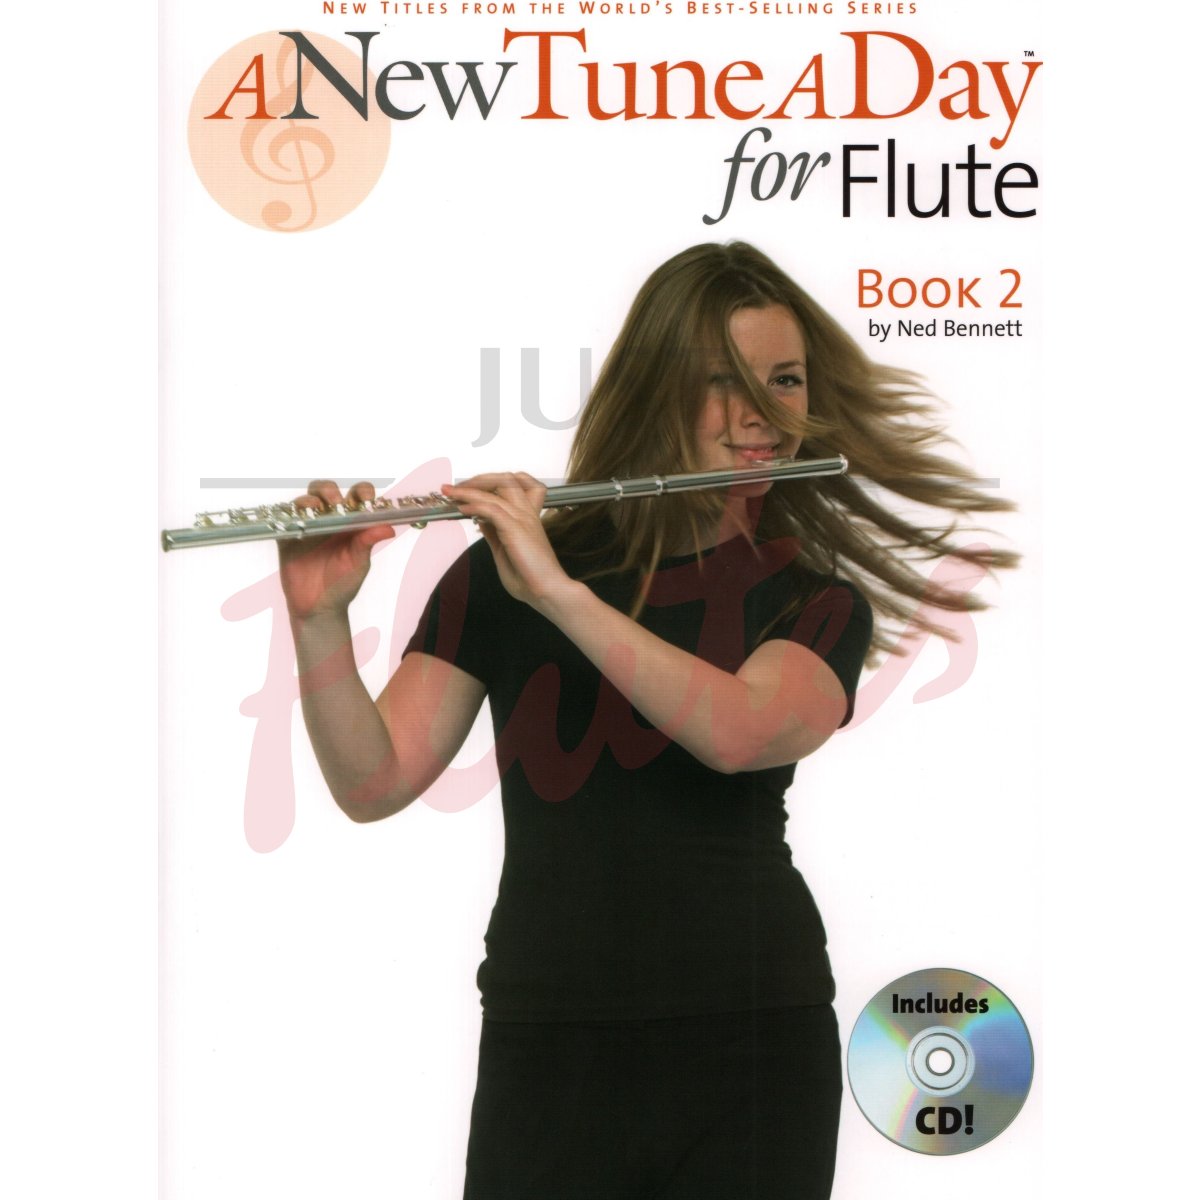 A New Tune A Day for Flute, Book 2